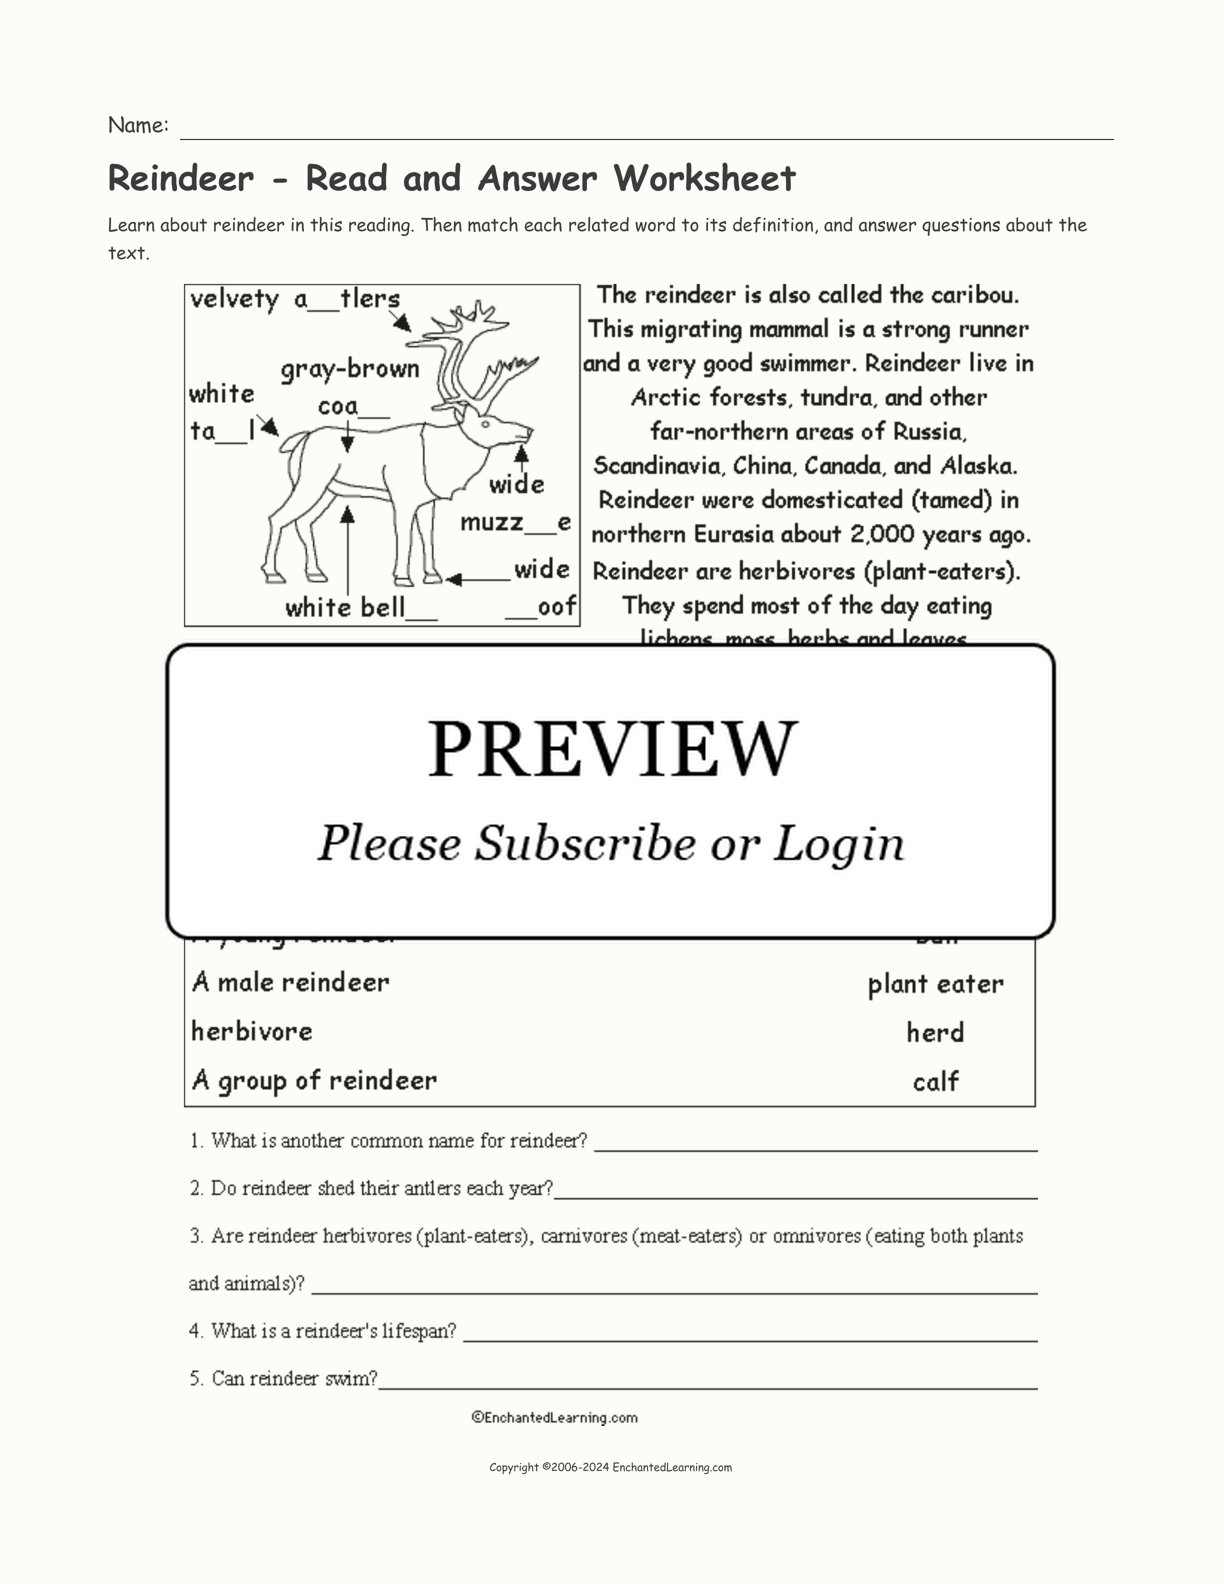 Reindeer - Read and Answer Worksheet interactive worksheet page 1